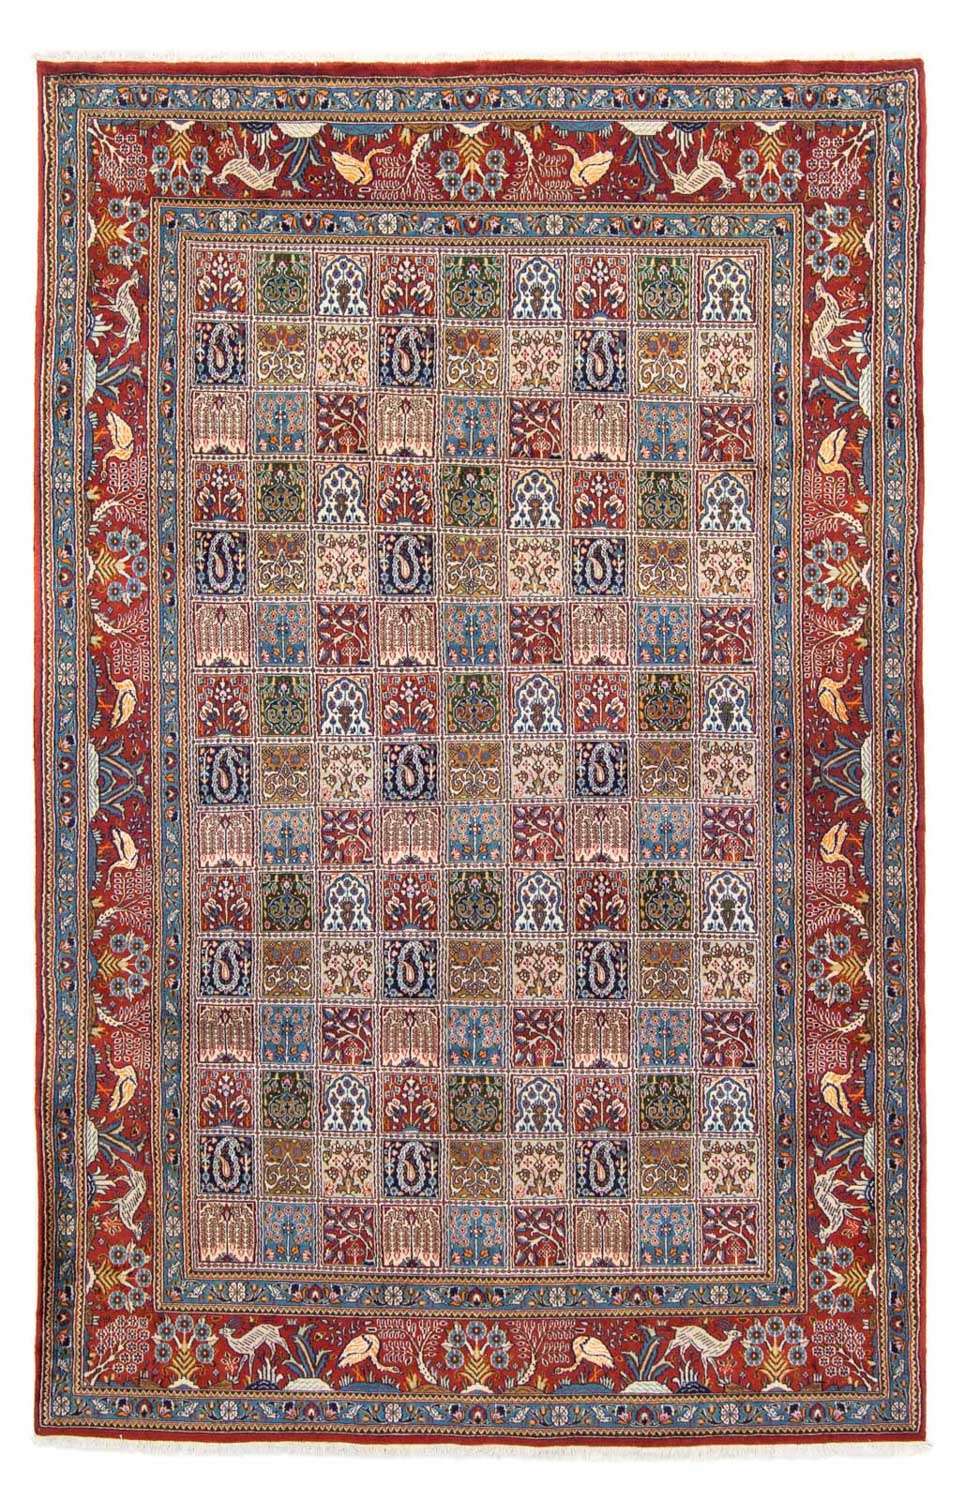 Perser Rug - Classic - 295 x 193 cm - light red